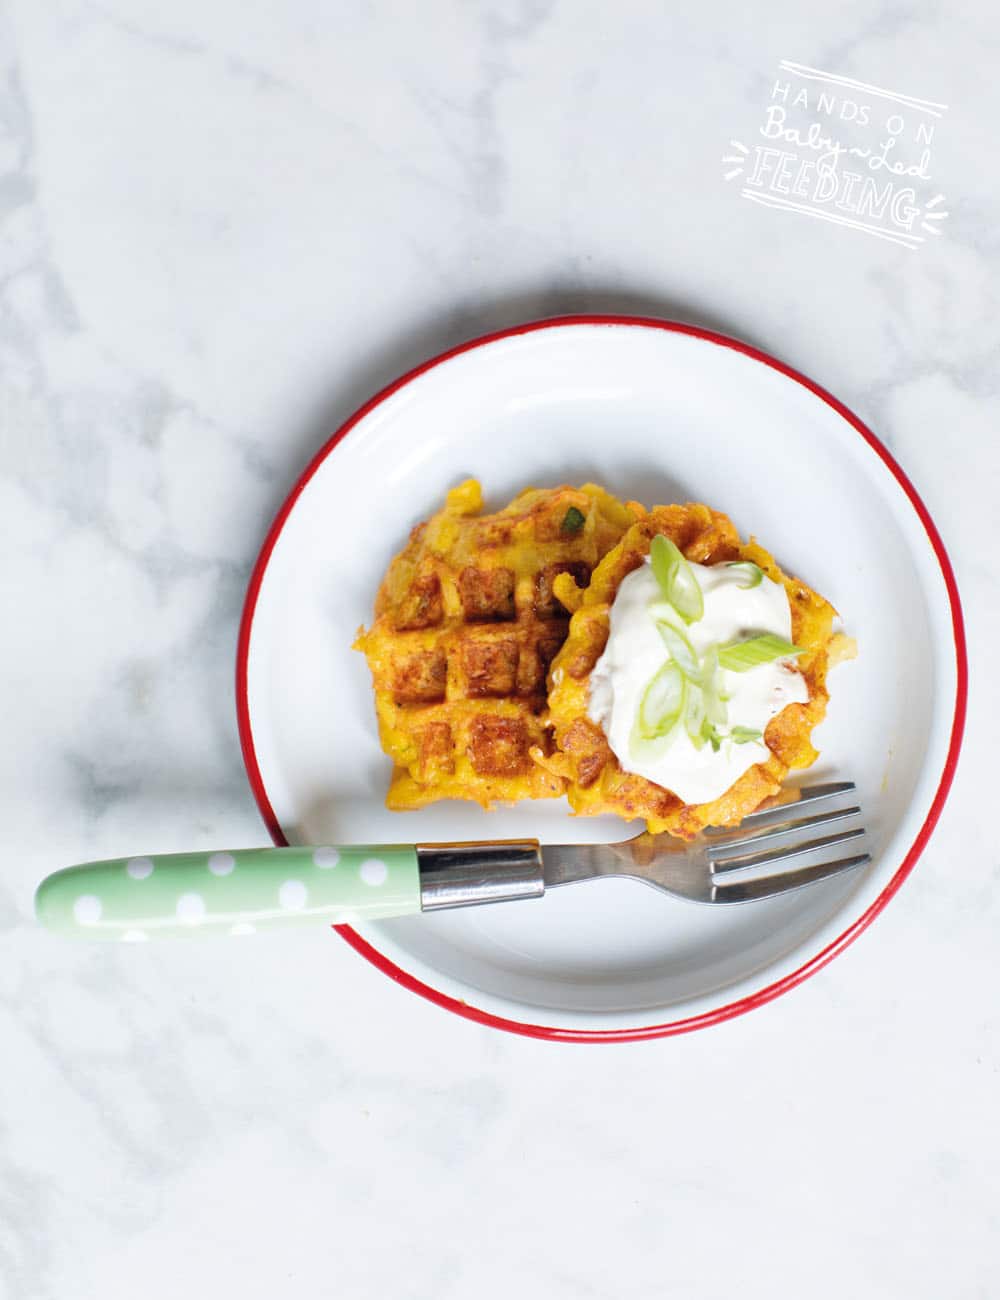 Baby Led weaning Carrot and Cheese Waffles Recipe Images6